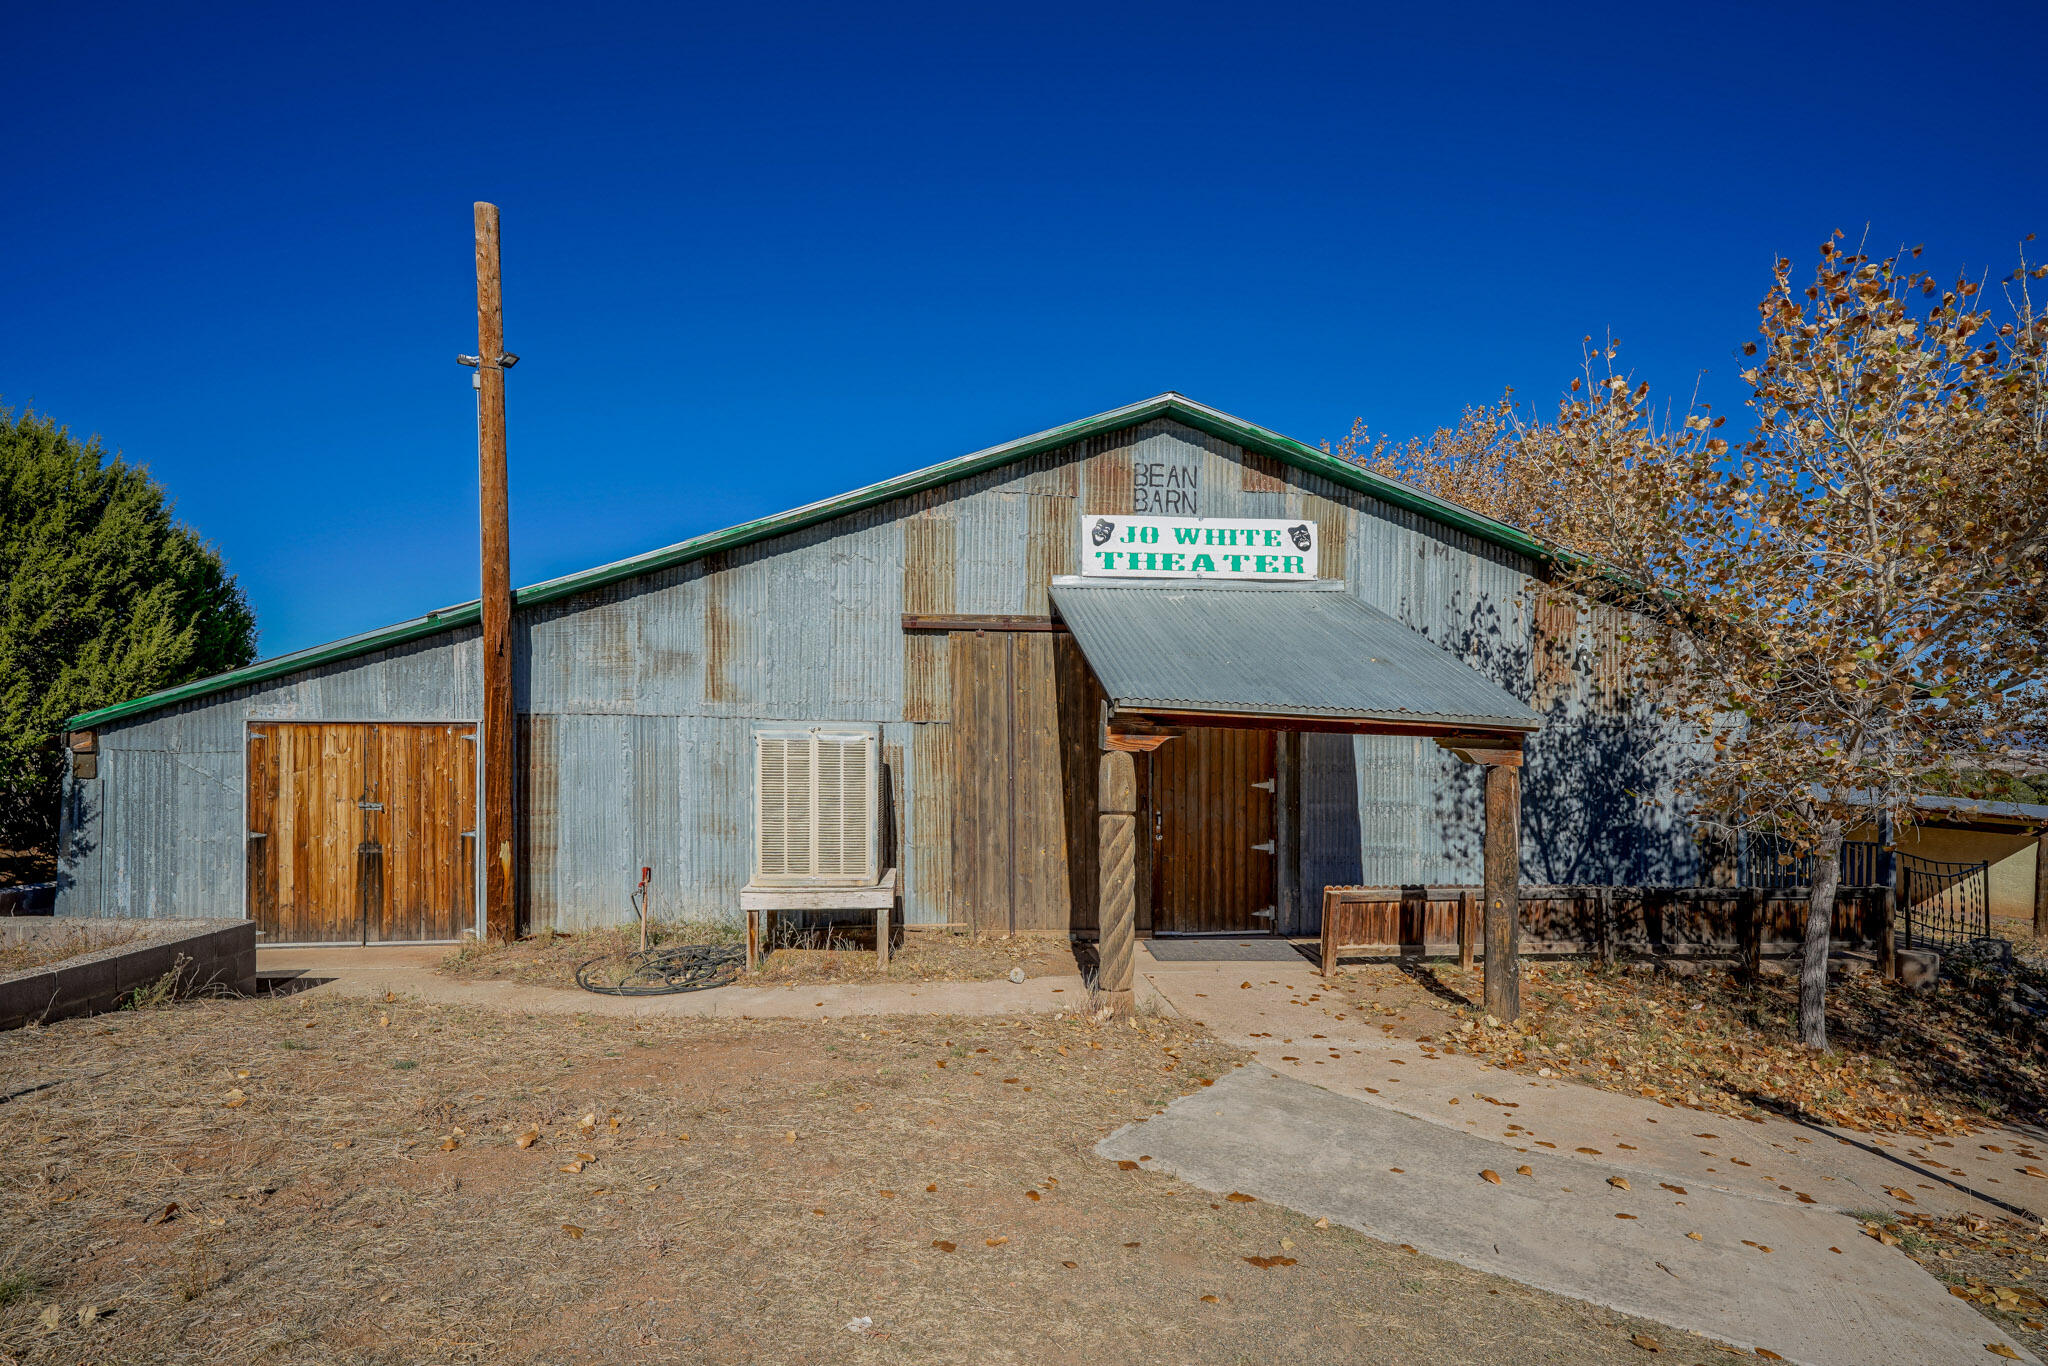 87 N Frontage Road, Edgewood, New Mexico 87015, ,Land,For Sale,87 N Frontage Road,1059494